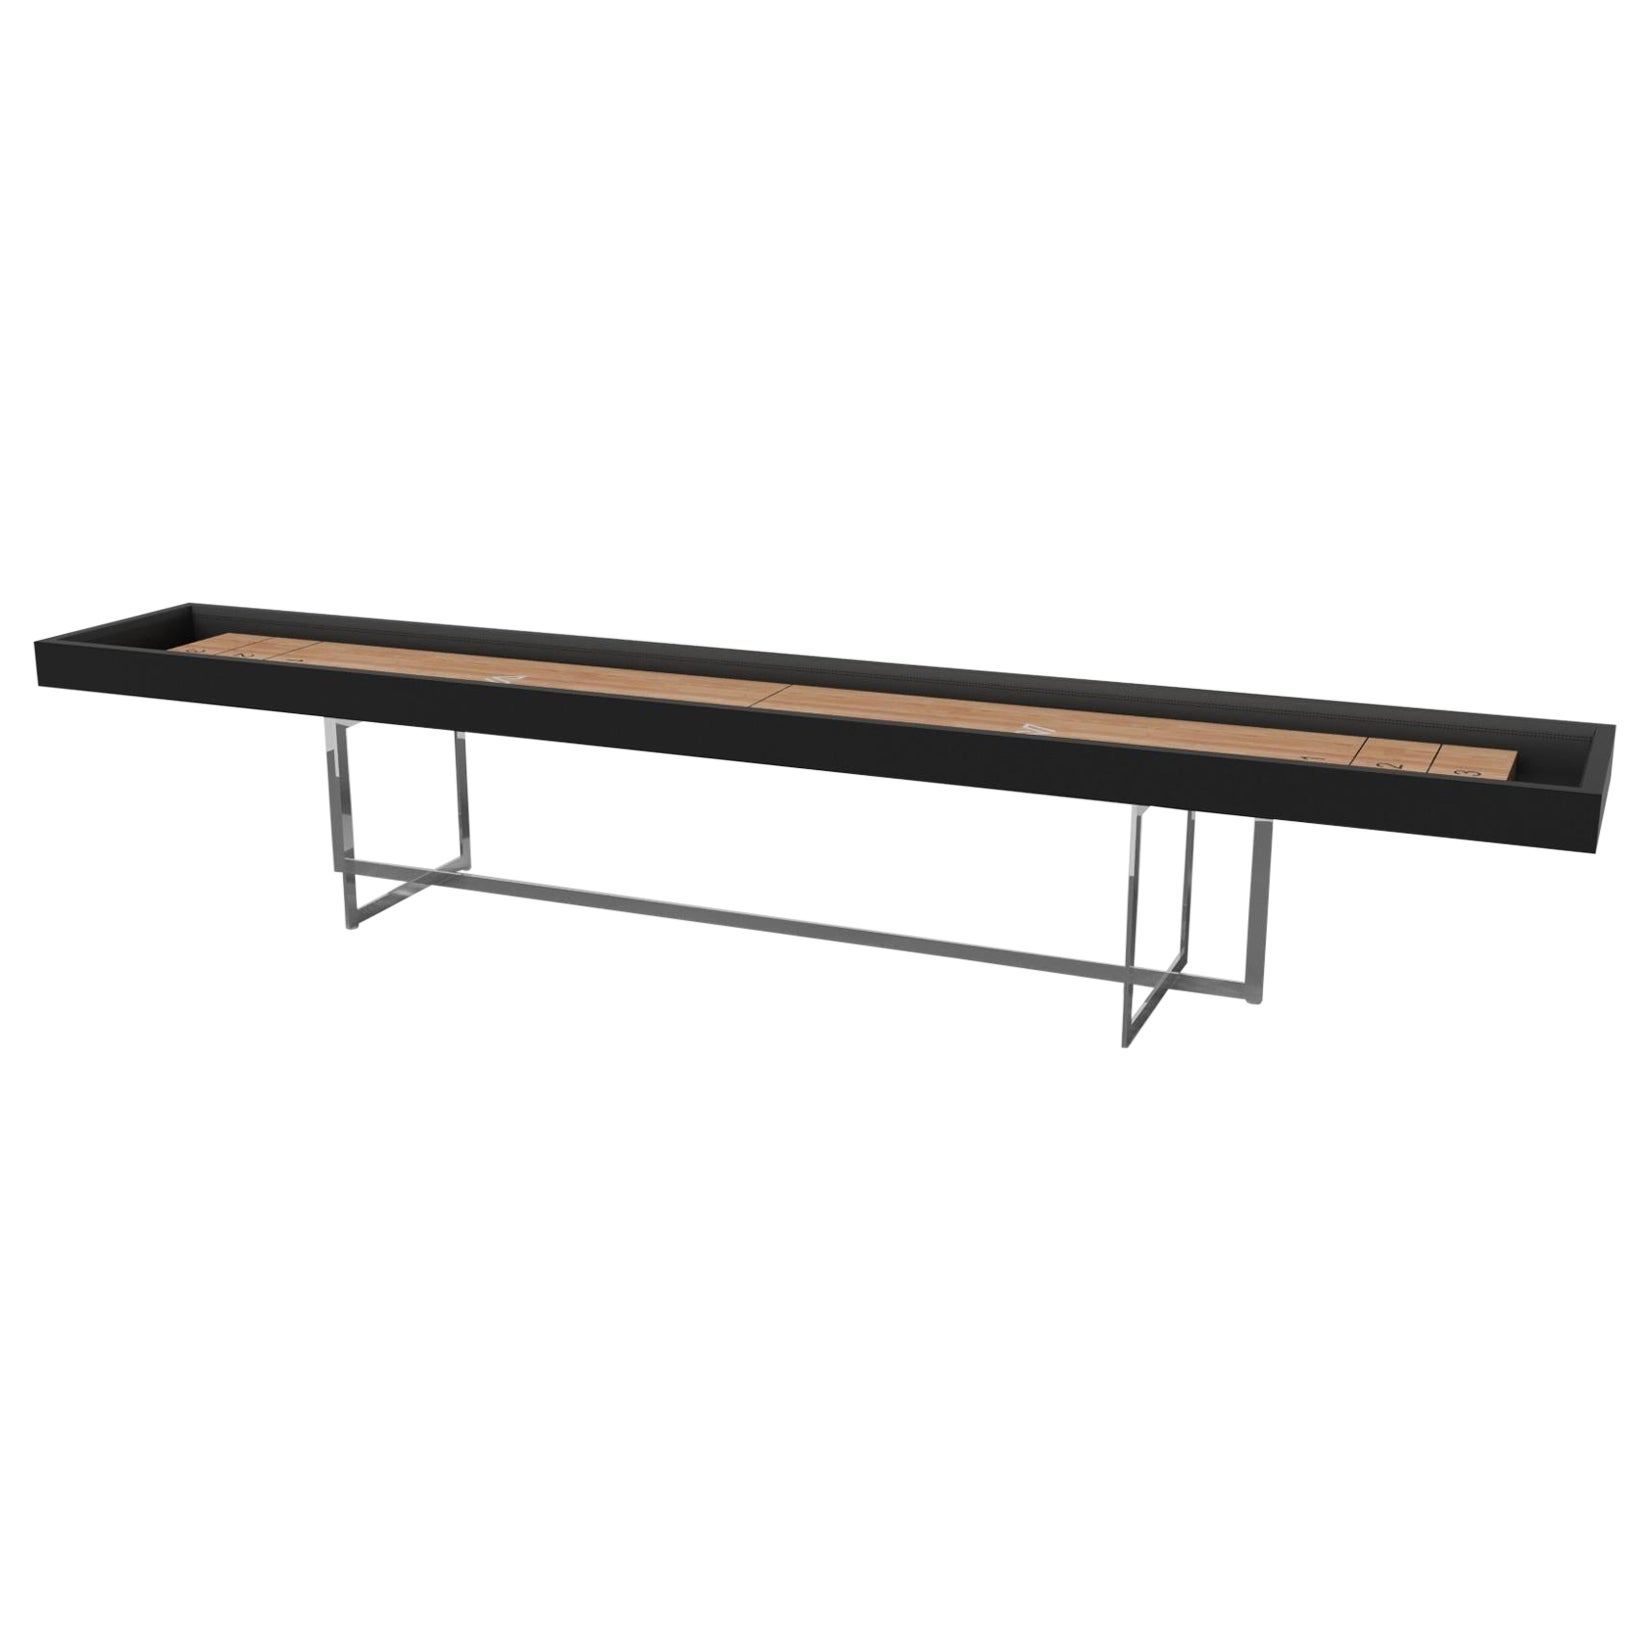 Elevate Customs Beso Shuffleboard Tables / Solid Pantone Black Color in 22' -USA